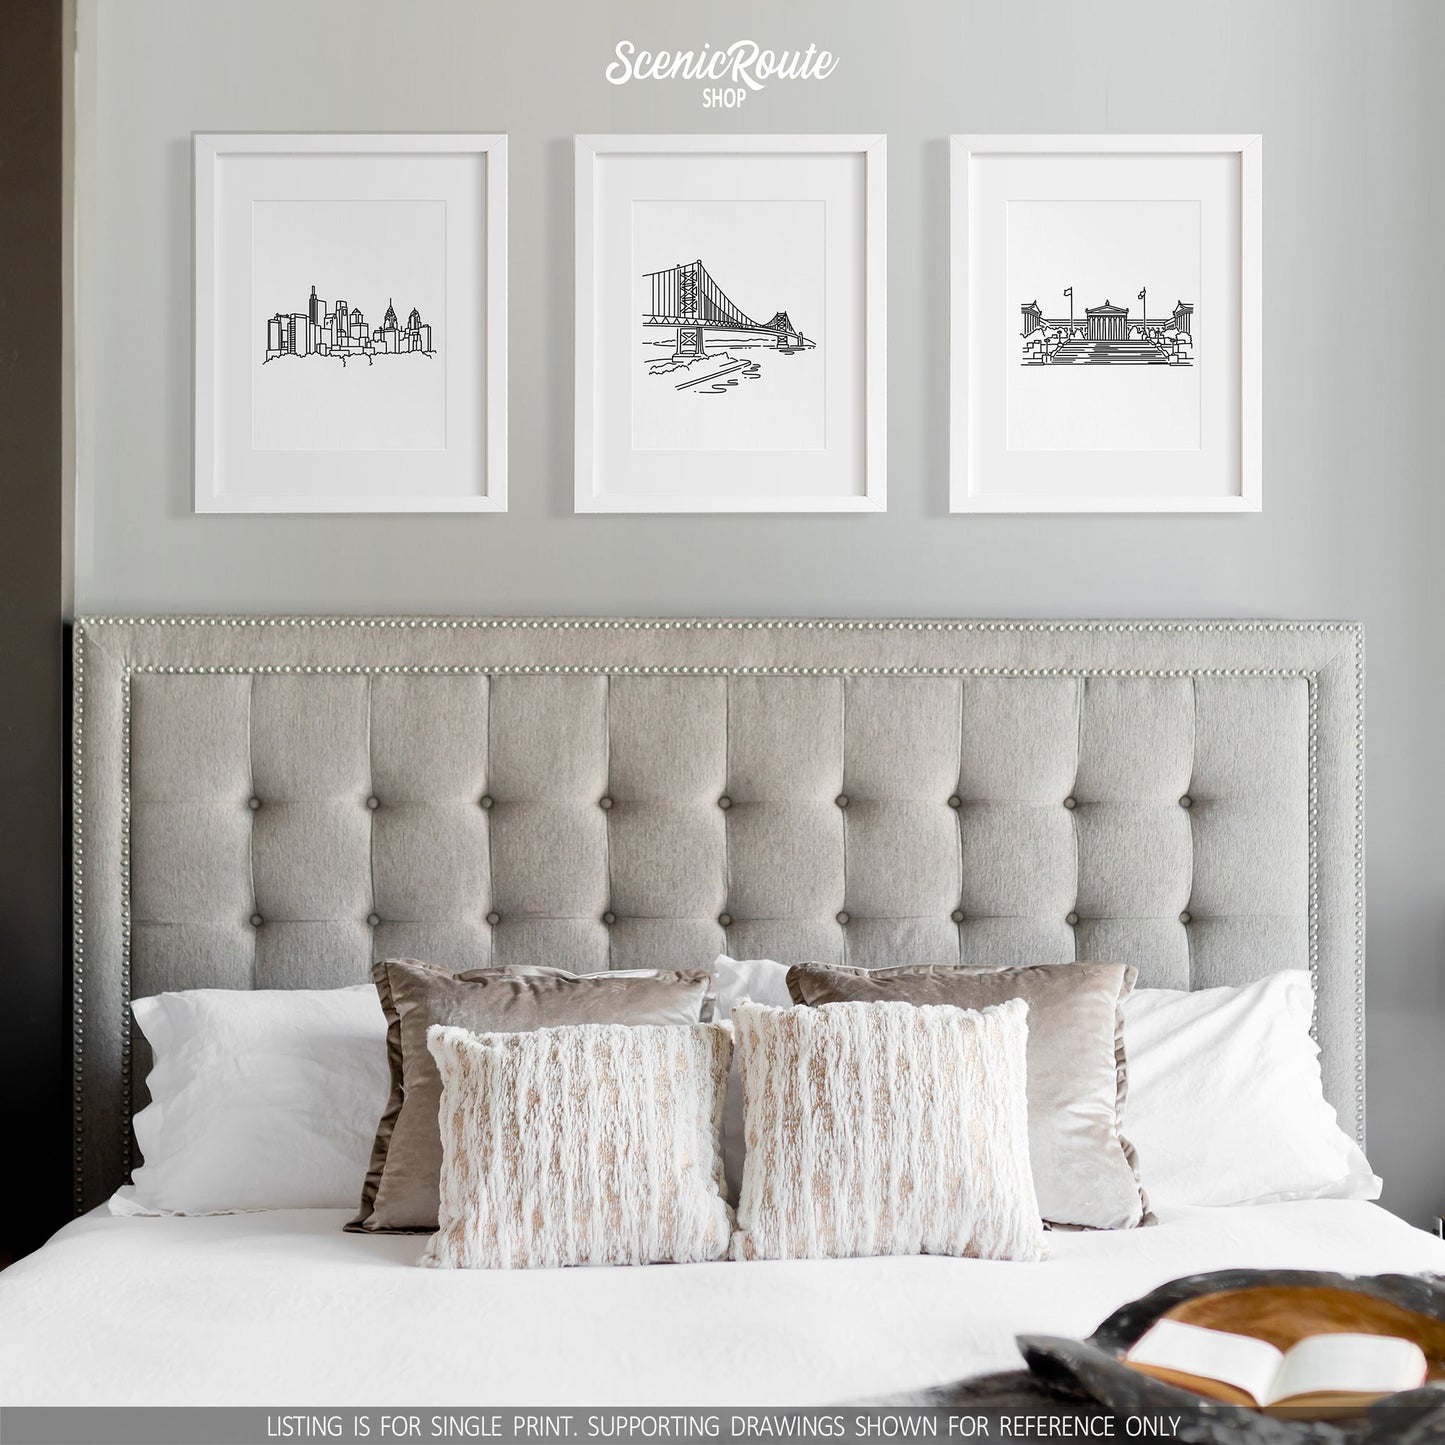 A group of three framed drawings on a white wall above a bed. The line art drawings include the Philadelphia Skyline, Ben Franklin Bridge, and Philadelphia Art Museum